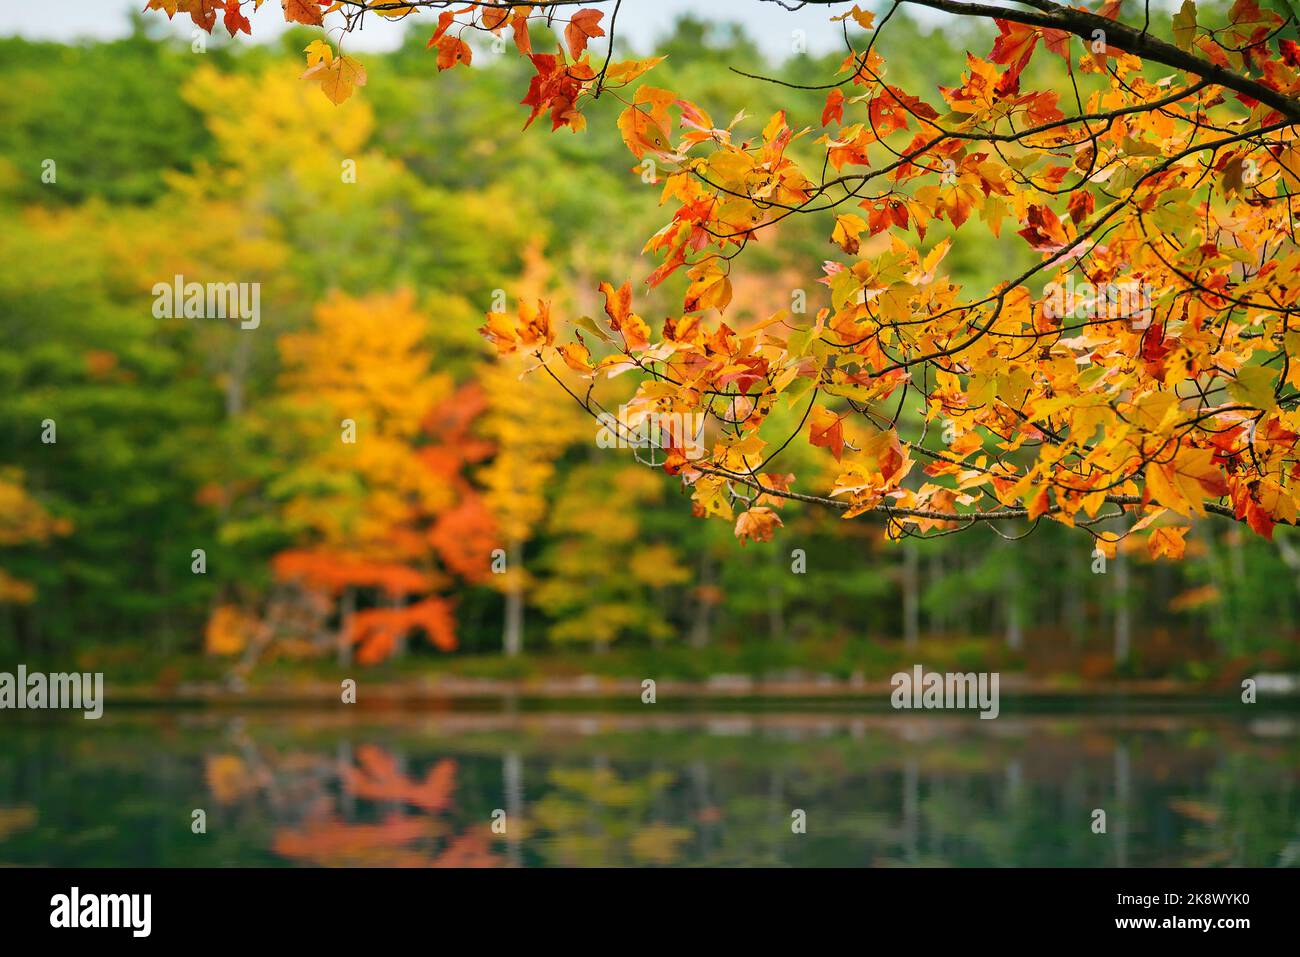 Autumn tree leaves in the foreground and colorful trees with reflections in the background. Autumn foliage landscape in Maine, New England. Stock Photo